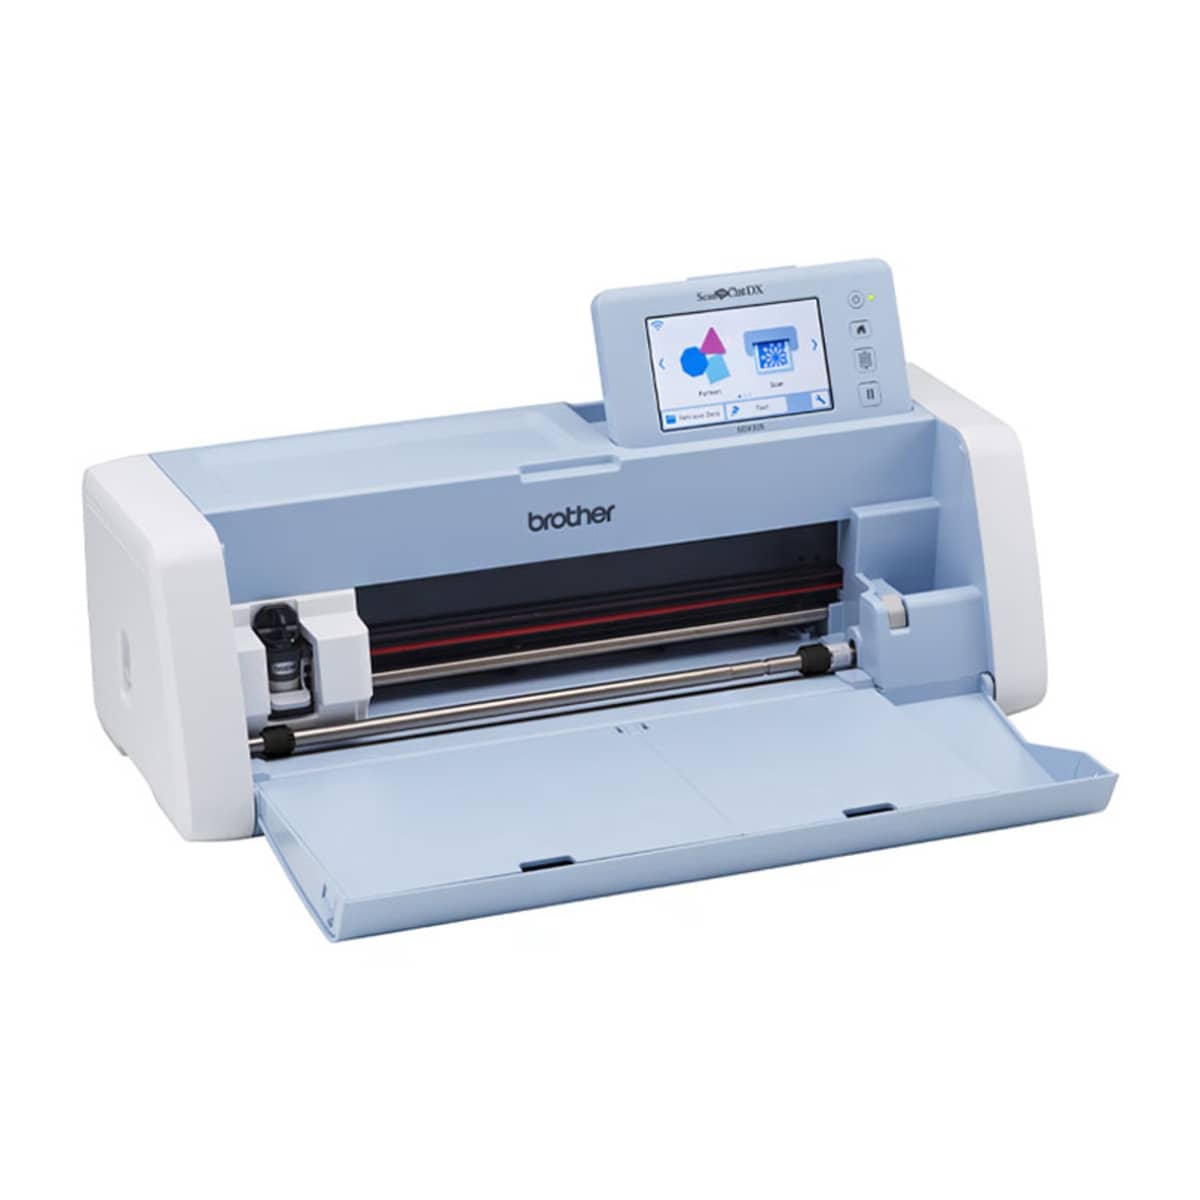 Reviews for Brother ScanNCut DX Electronic Cutting Machine in